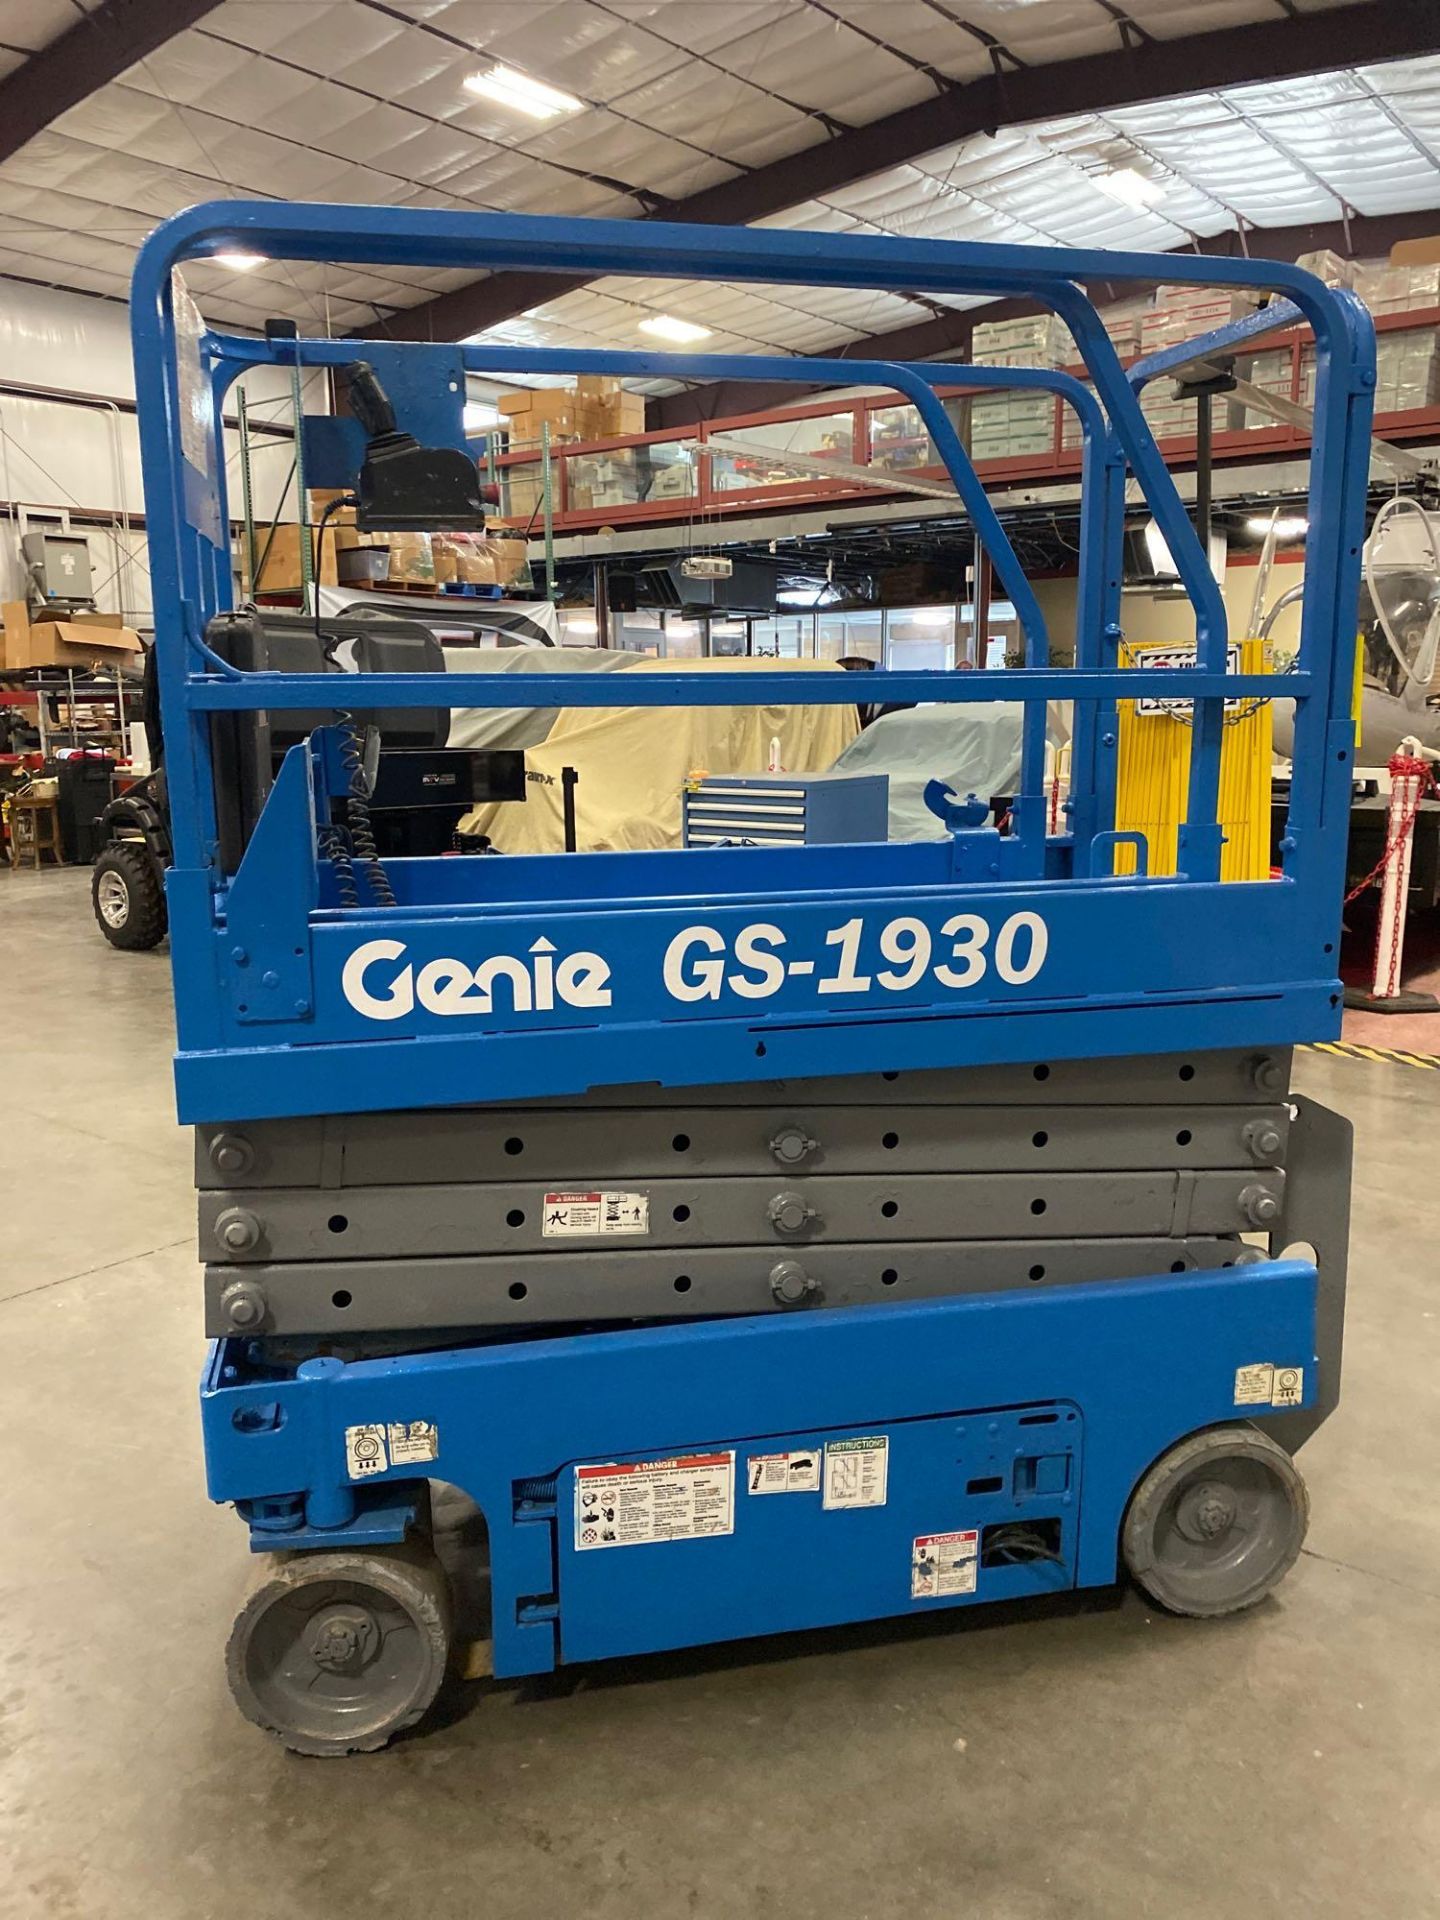 GENIE GS1930 SCISSOR LIFT, SELF PROPELLED, 19' PLATFORM HEIGHT, BUILT IN BATTERY CHARGER, SLIDE OUT - Image 3 of 10